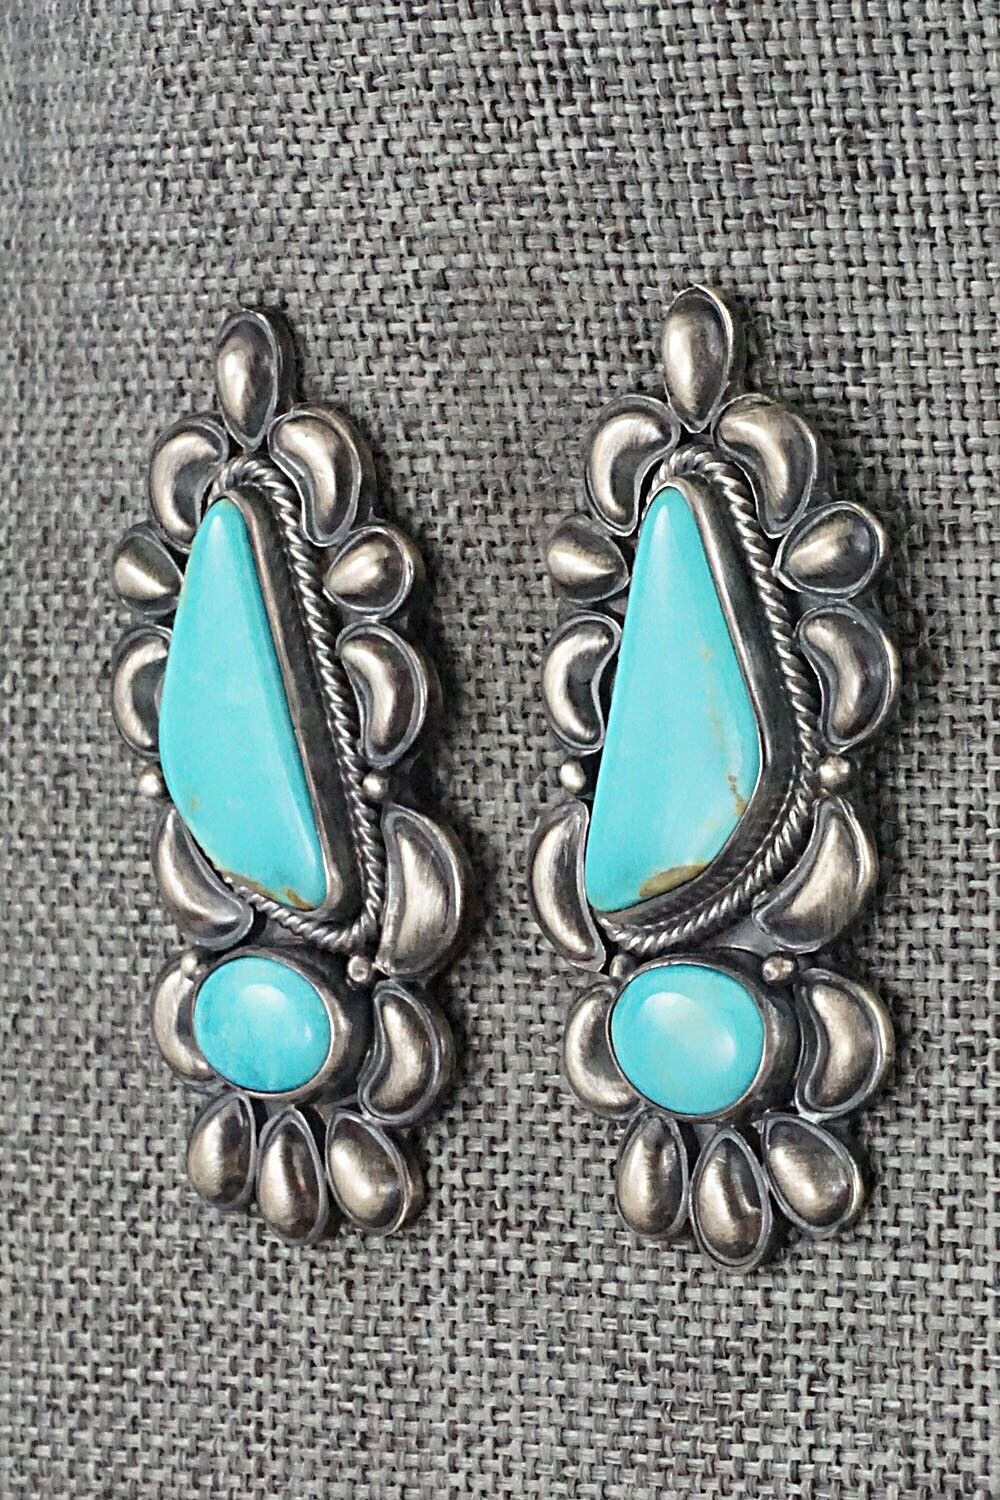 Turquoise & Sterling Silver Earrings - Bernyse Chavez